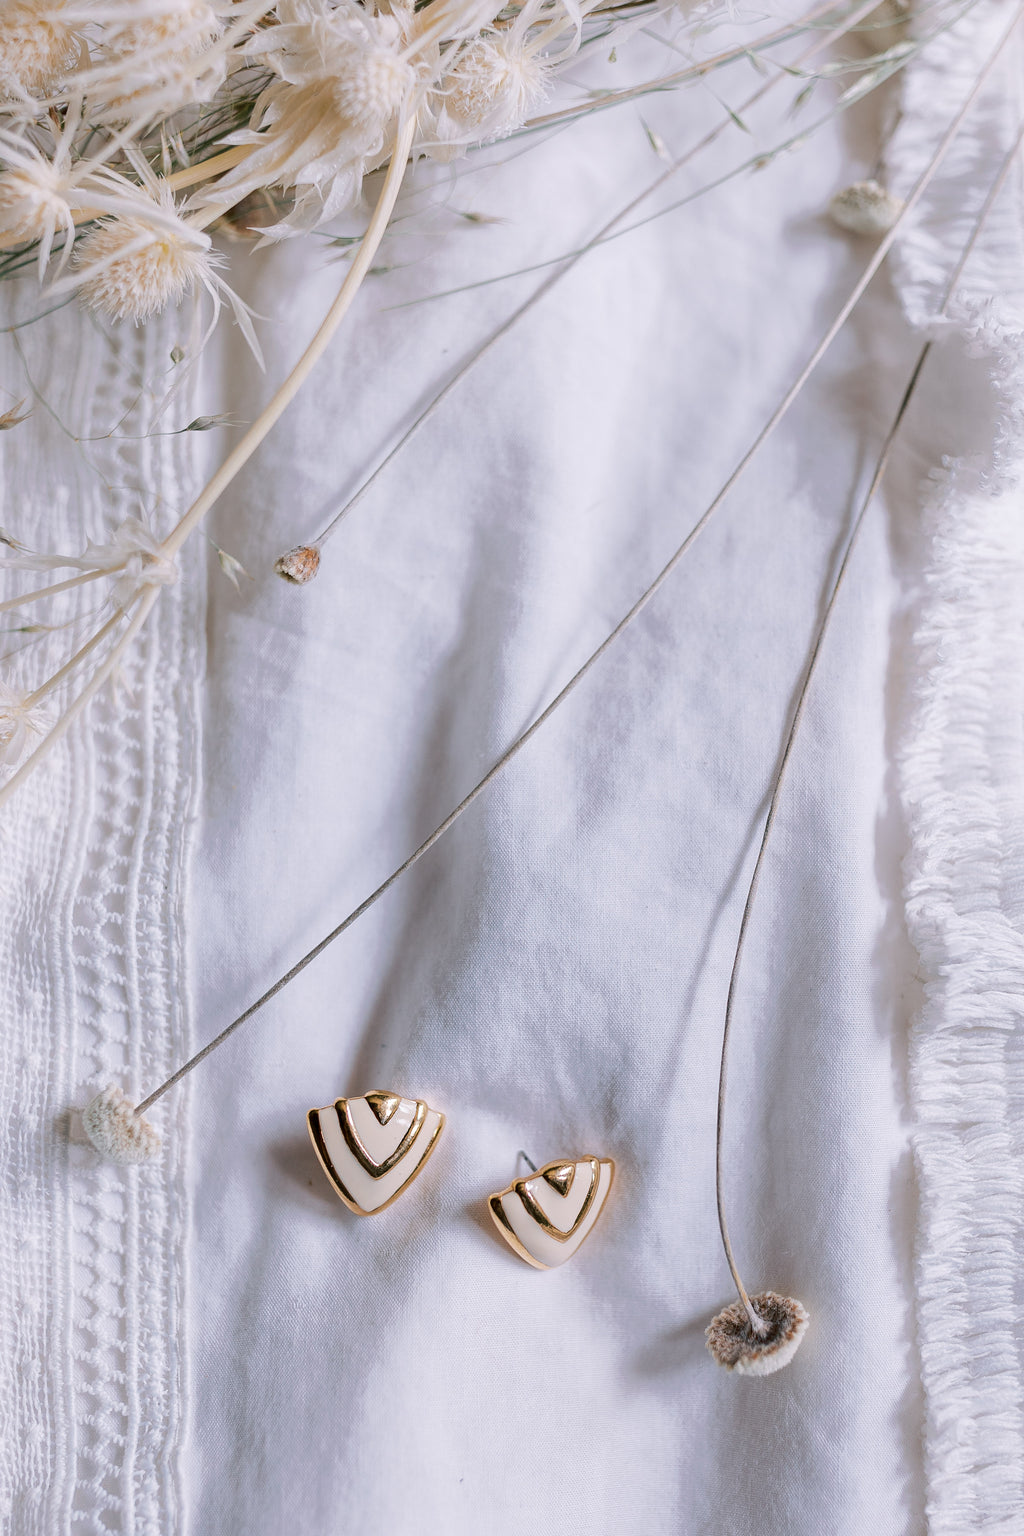 Vintage White and Gold Geometric Studs